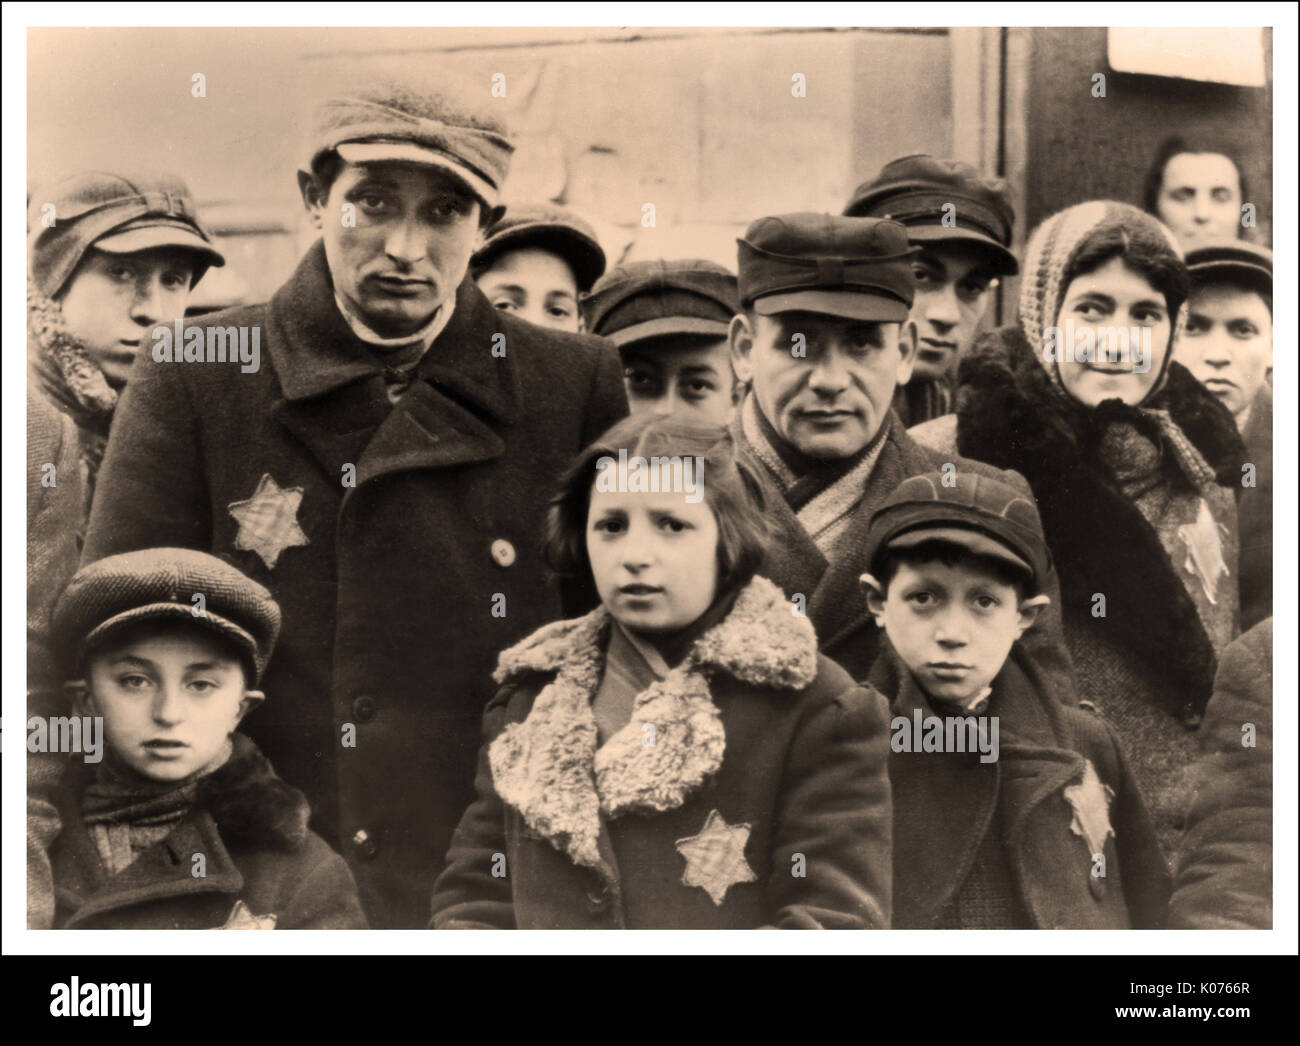 LODZ JEWISH GHETTO Men Women and Children stare at the Nazi photographers camera in apprehension, wearing Nazi designated 'Star of David' yellow stars to denote Jewish people, in the infamous Polish Lodz Ghetto Poland. Most were taken to Nazi concentration camps to fulfil Hitler's 'final solution'. Facilitated by the infamous war criminal Heinrich Himmler. Stock Photo